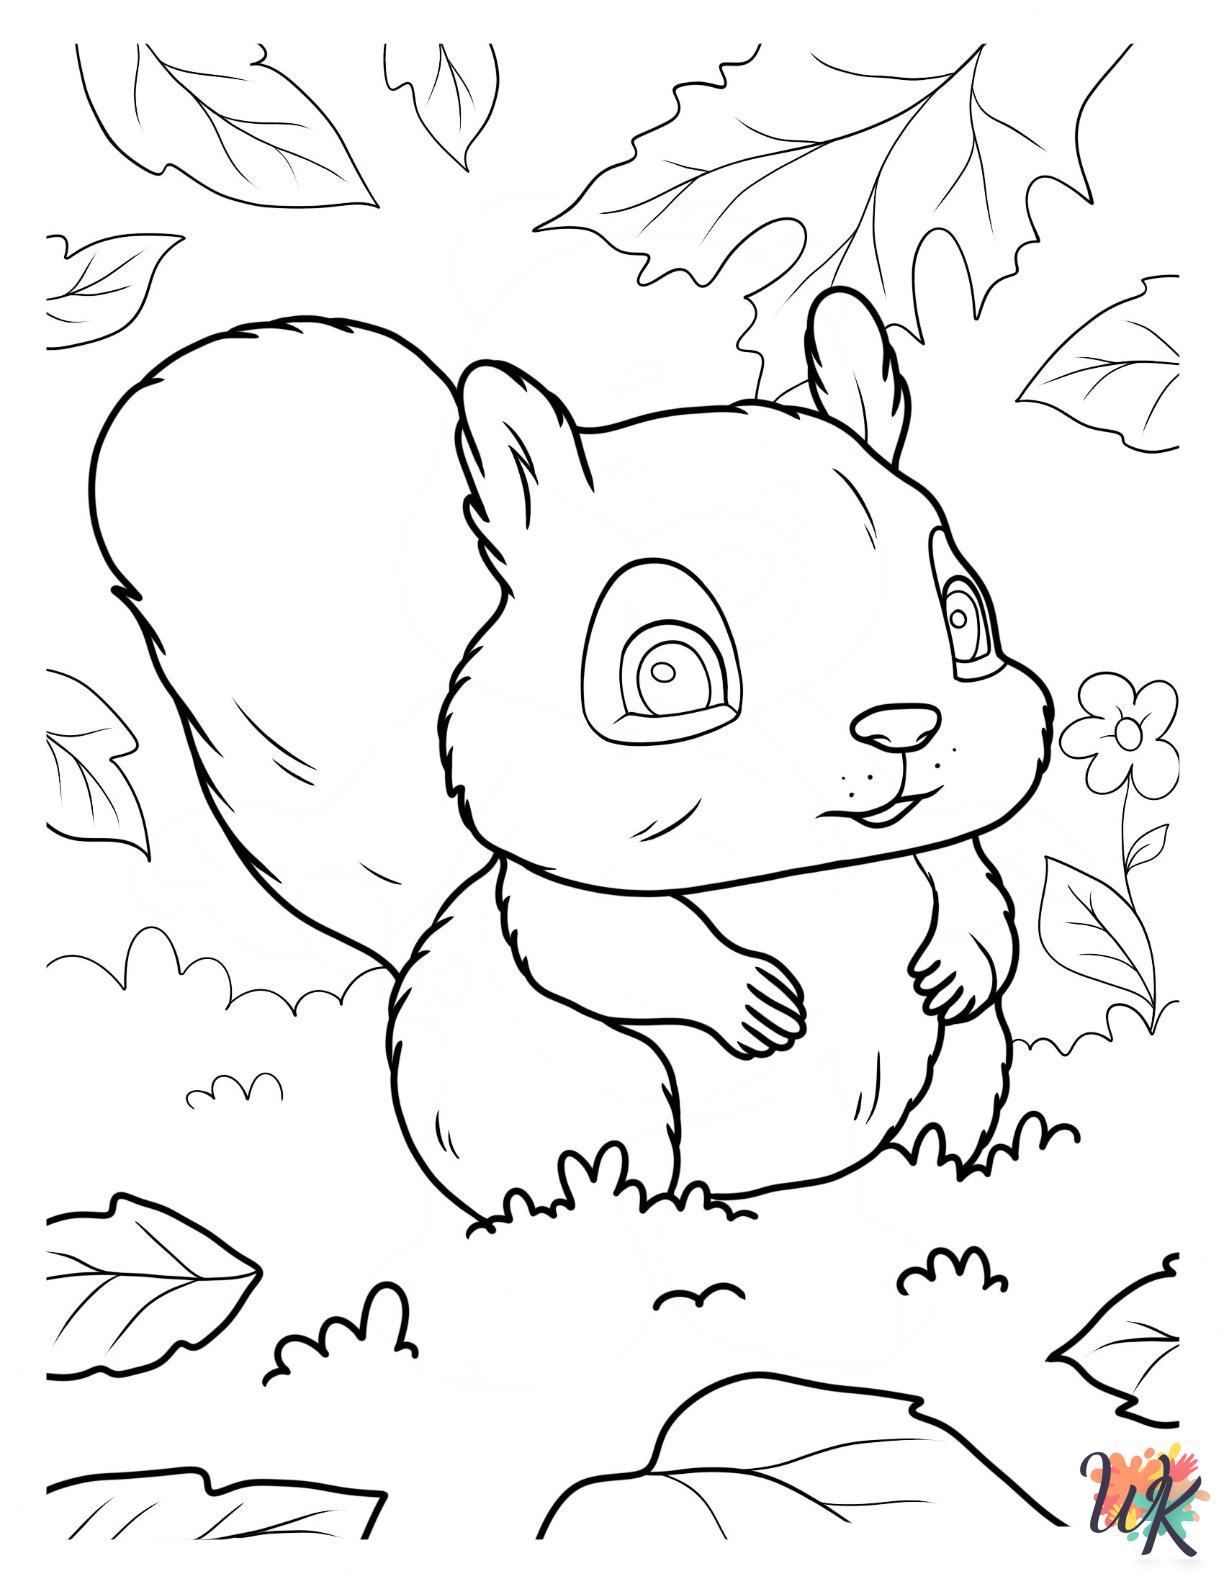 Squirrel coloring pages for preschoolers